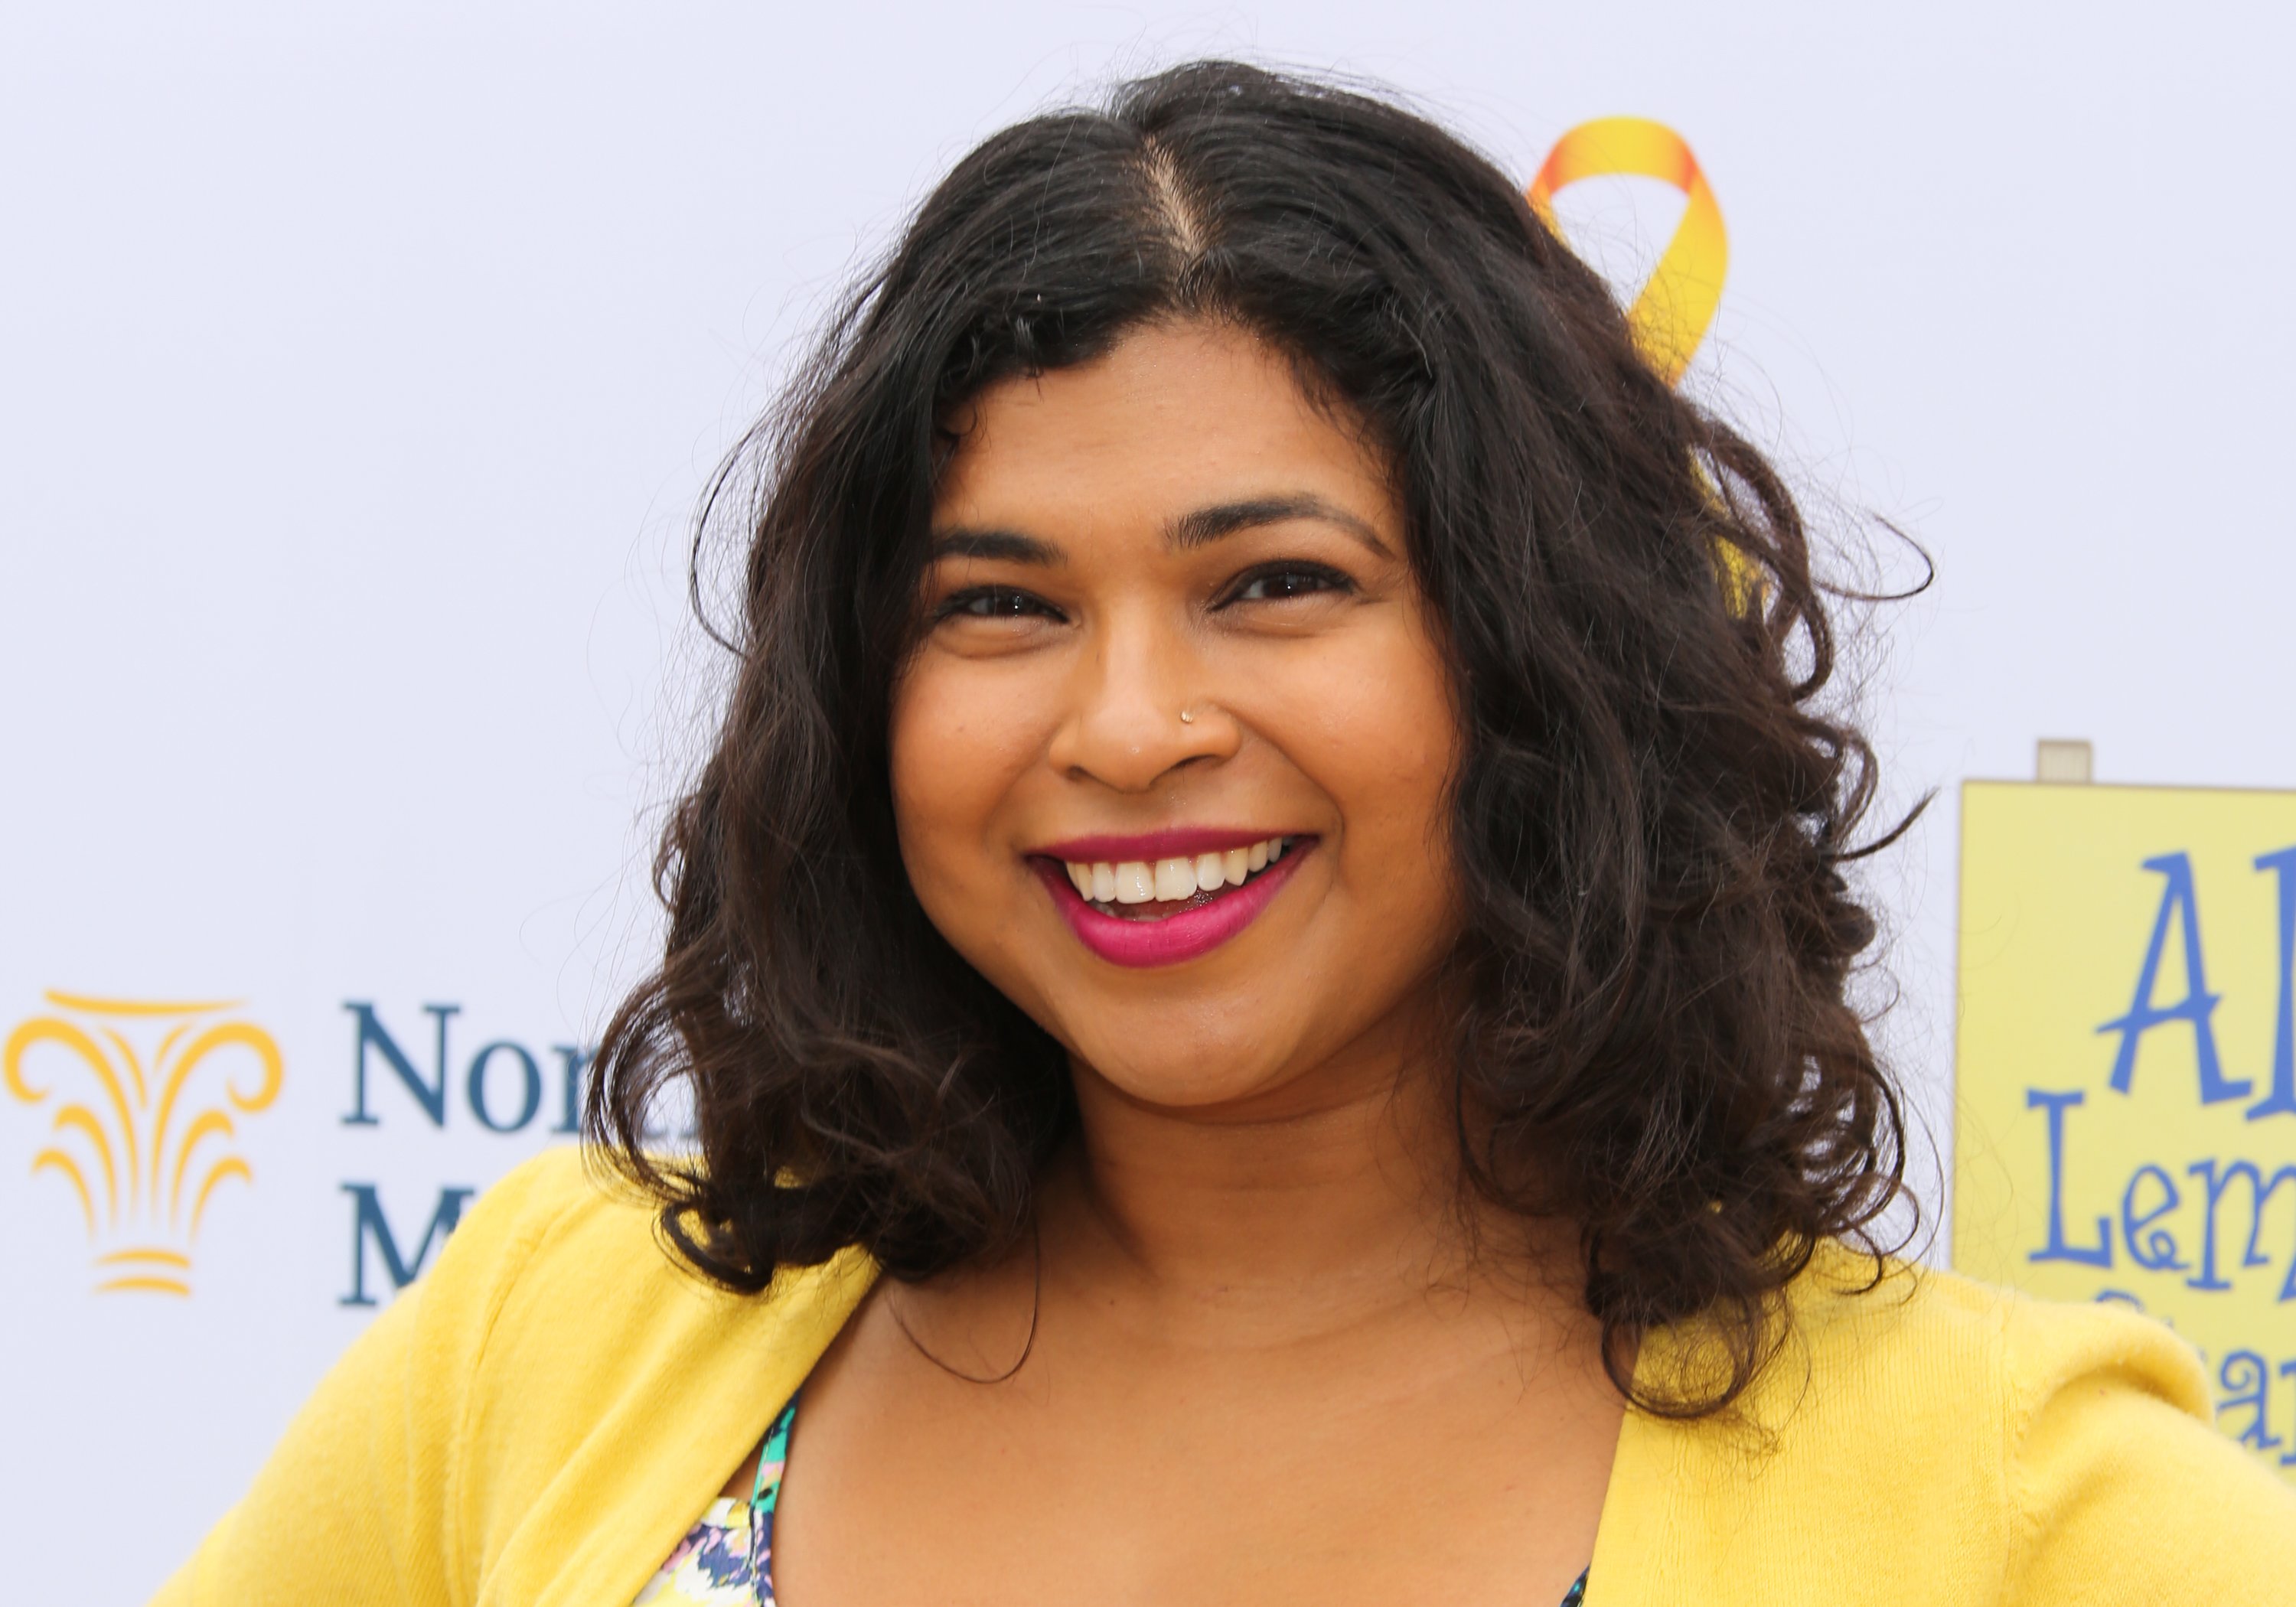 Food Network star Aarti Sequeira wears a yellow sweater in this photograph.